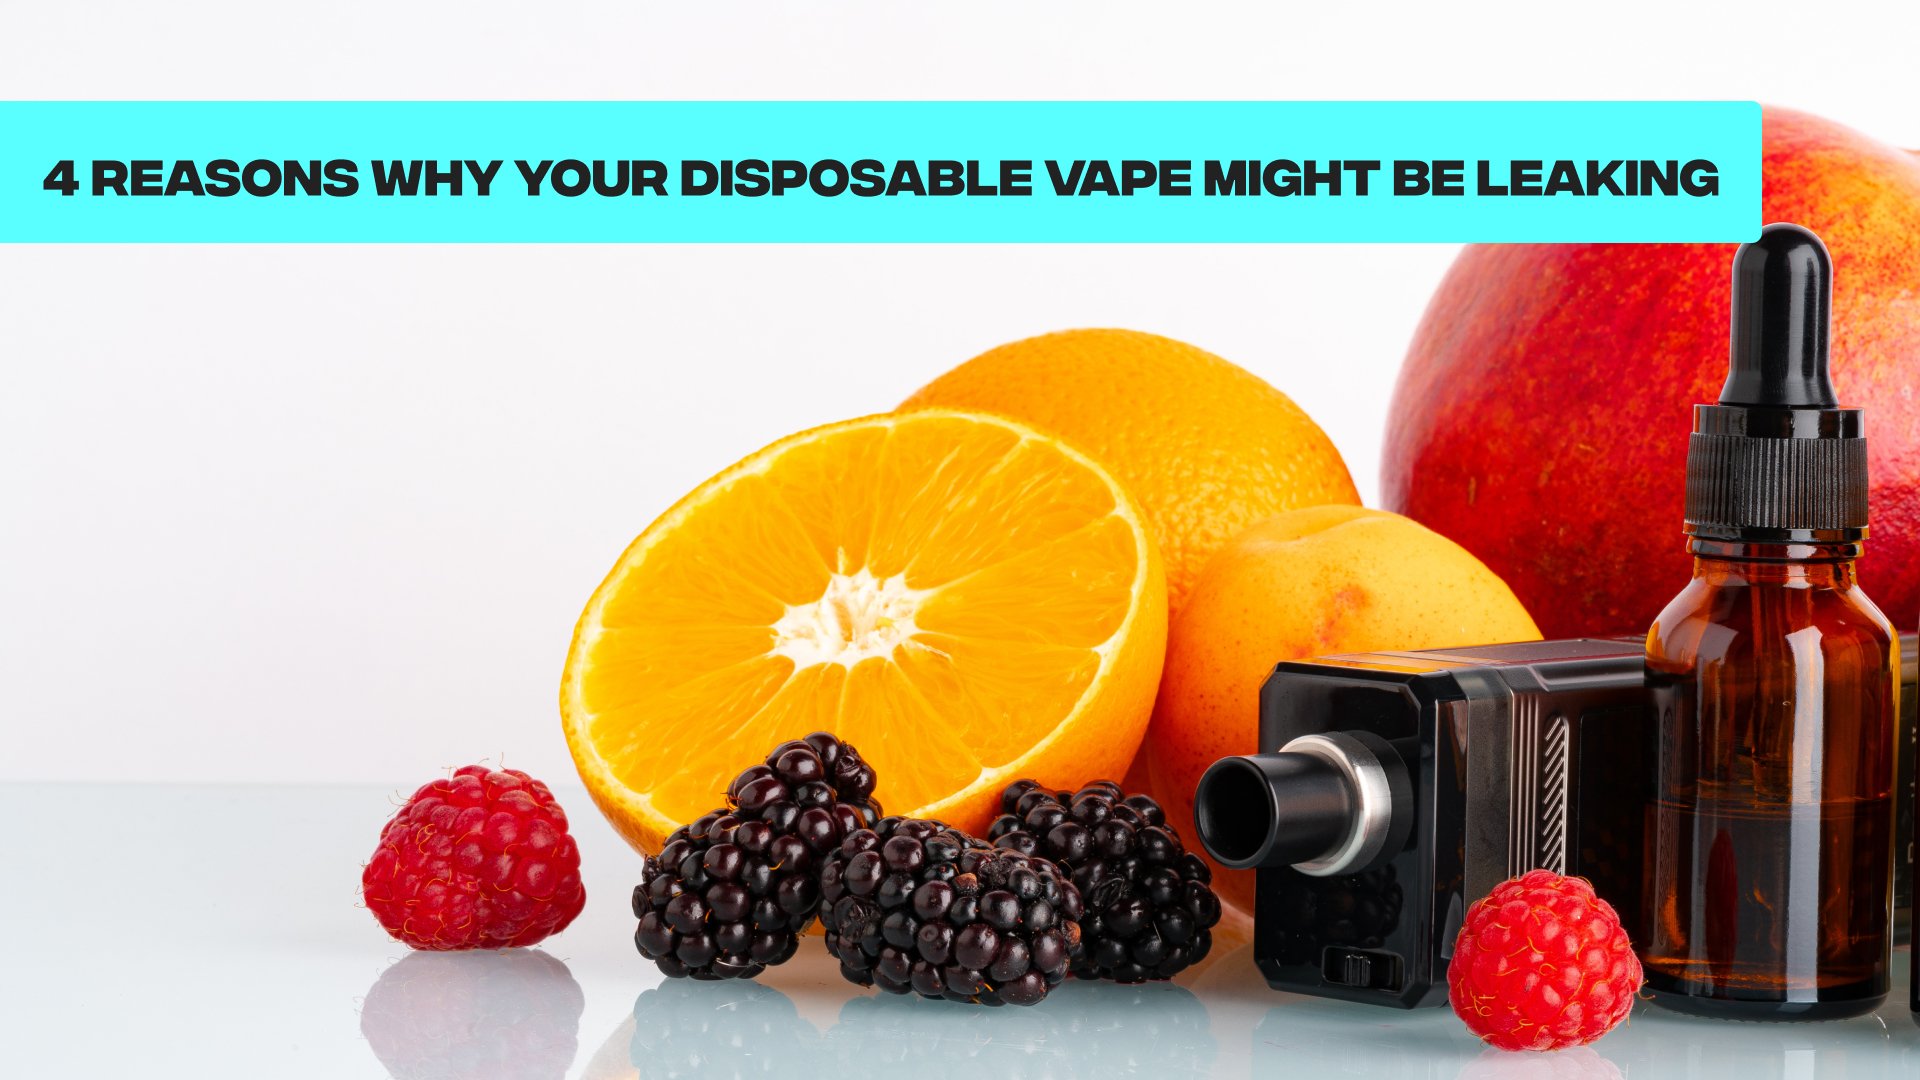 Why Your Disposable Vape Leak